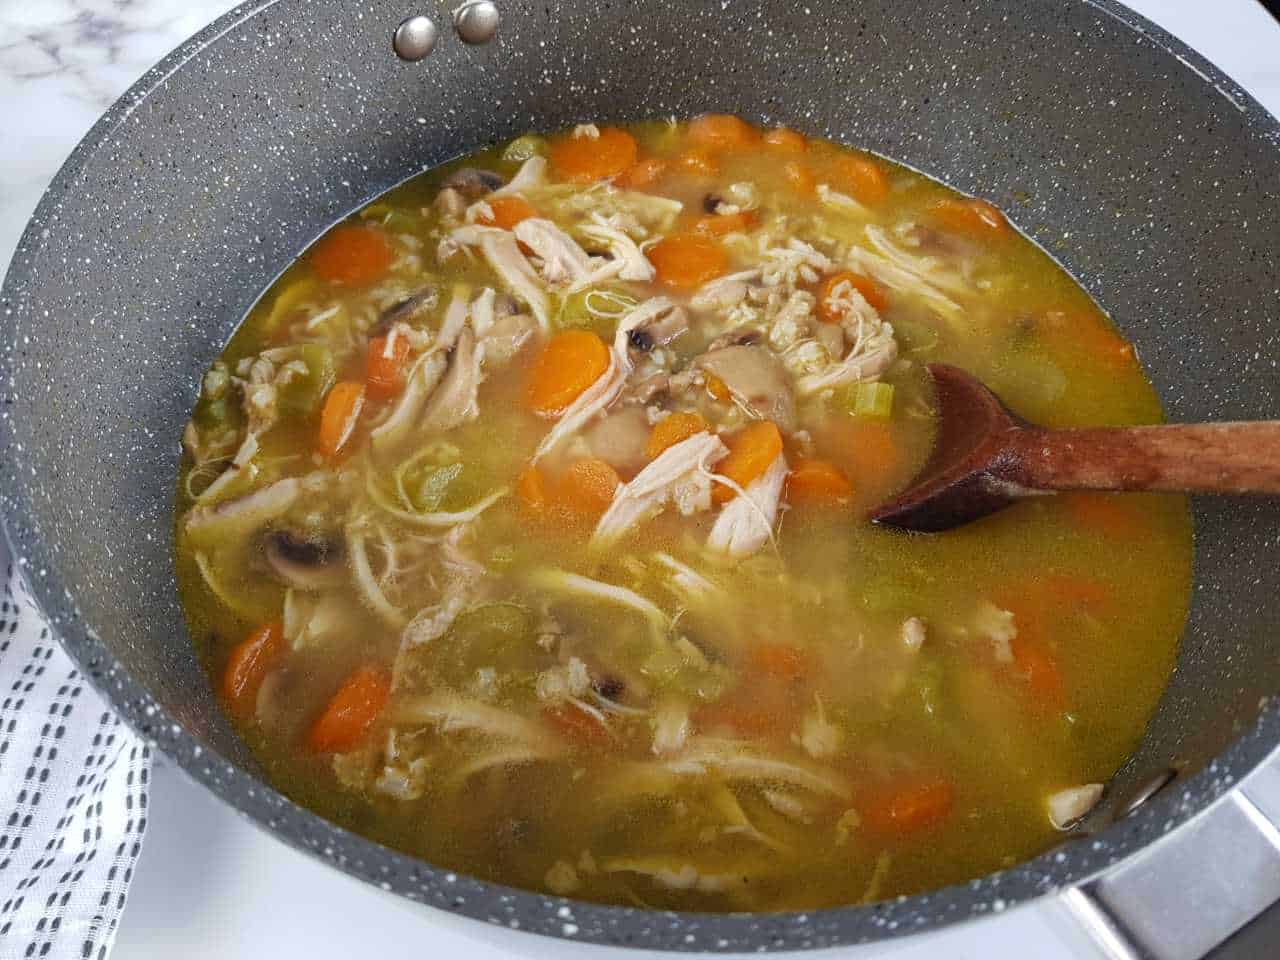 Chicken and rice soup in a gray pot with a wooden spoon.